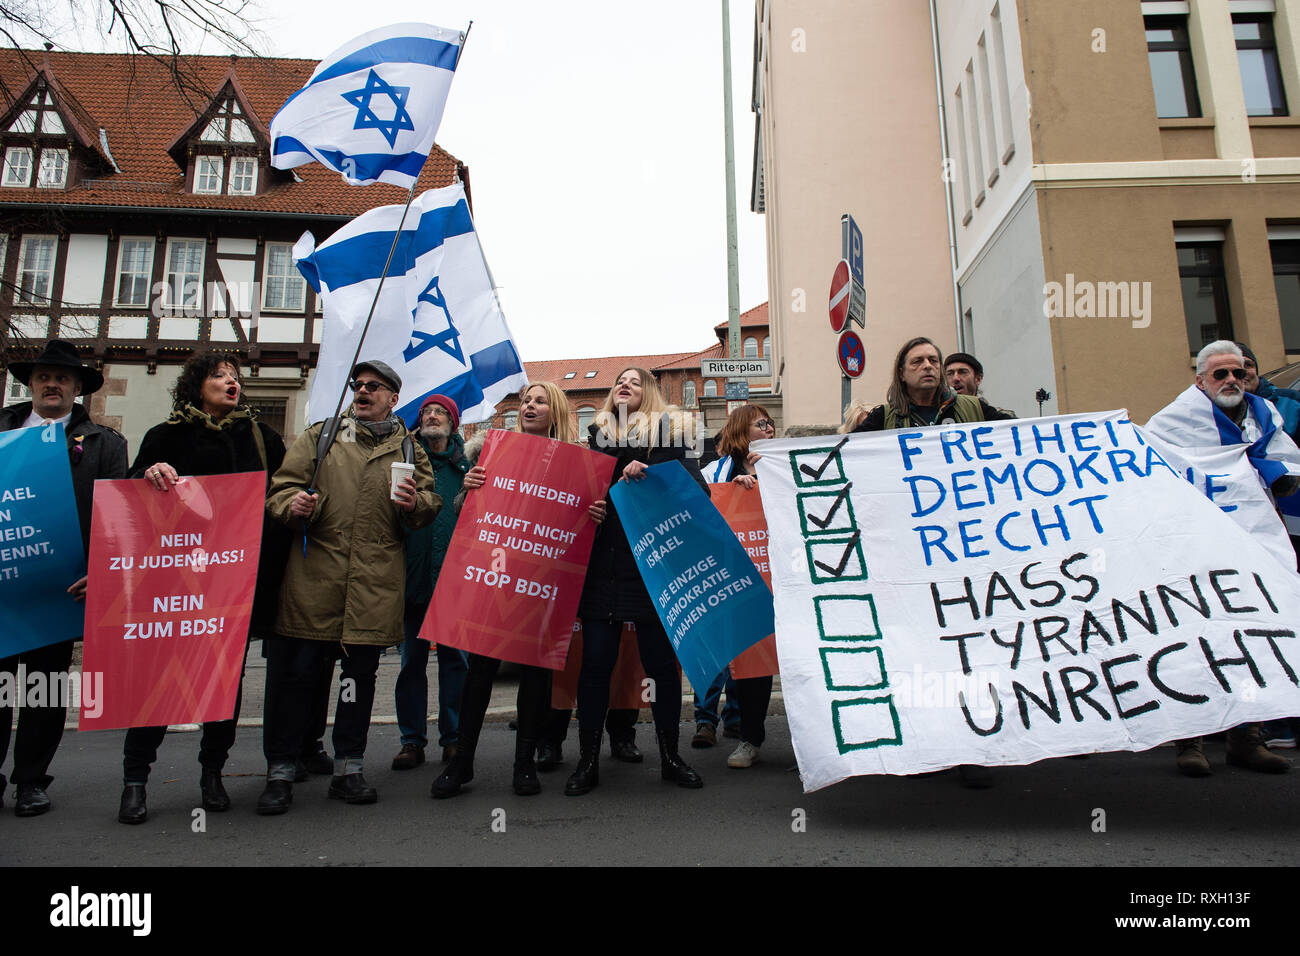 Lower Saxony, Germany. 9th March 2019. Participants with posters of the Alliance against Anti-Semitism and Anti-Zionism 'Jachad' protest under the motto 'No peace with the enemies of Israel' during the awarding of the Göttingen Peace Prize 2019 to the association 'Jewish Voice for Just Peace in the Middle East'. The Dr. Roland Röhl Foundation has been awarding the Göttingen Peace Prize since 1999, and there were reservations about this year's decision by the jury. Credit: dpa picture alliance/Alamy Live News Stock Photo